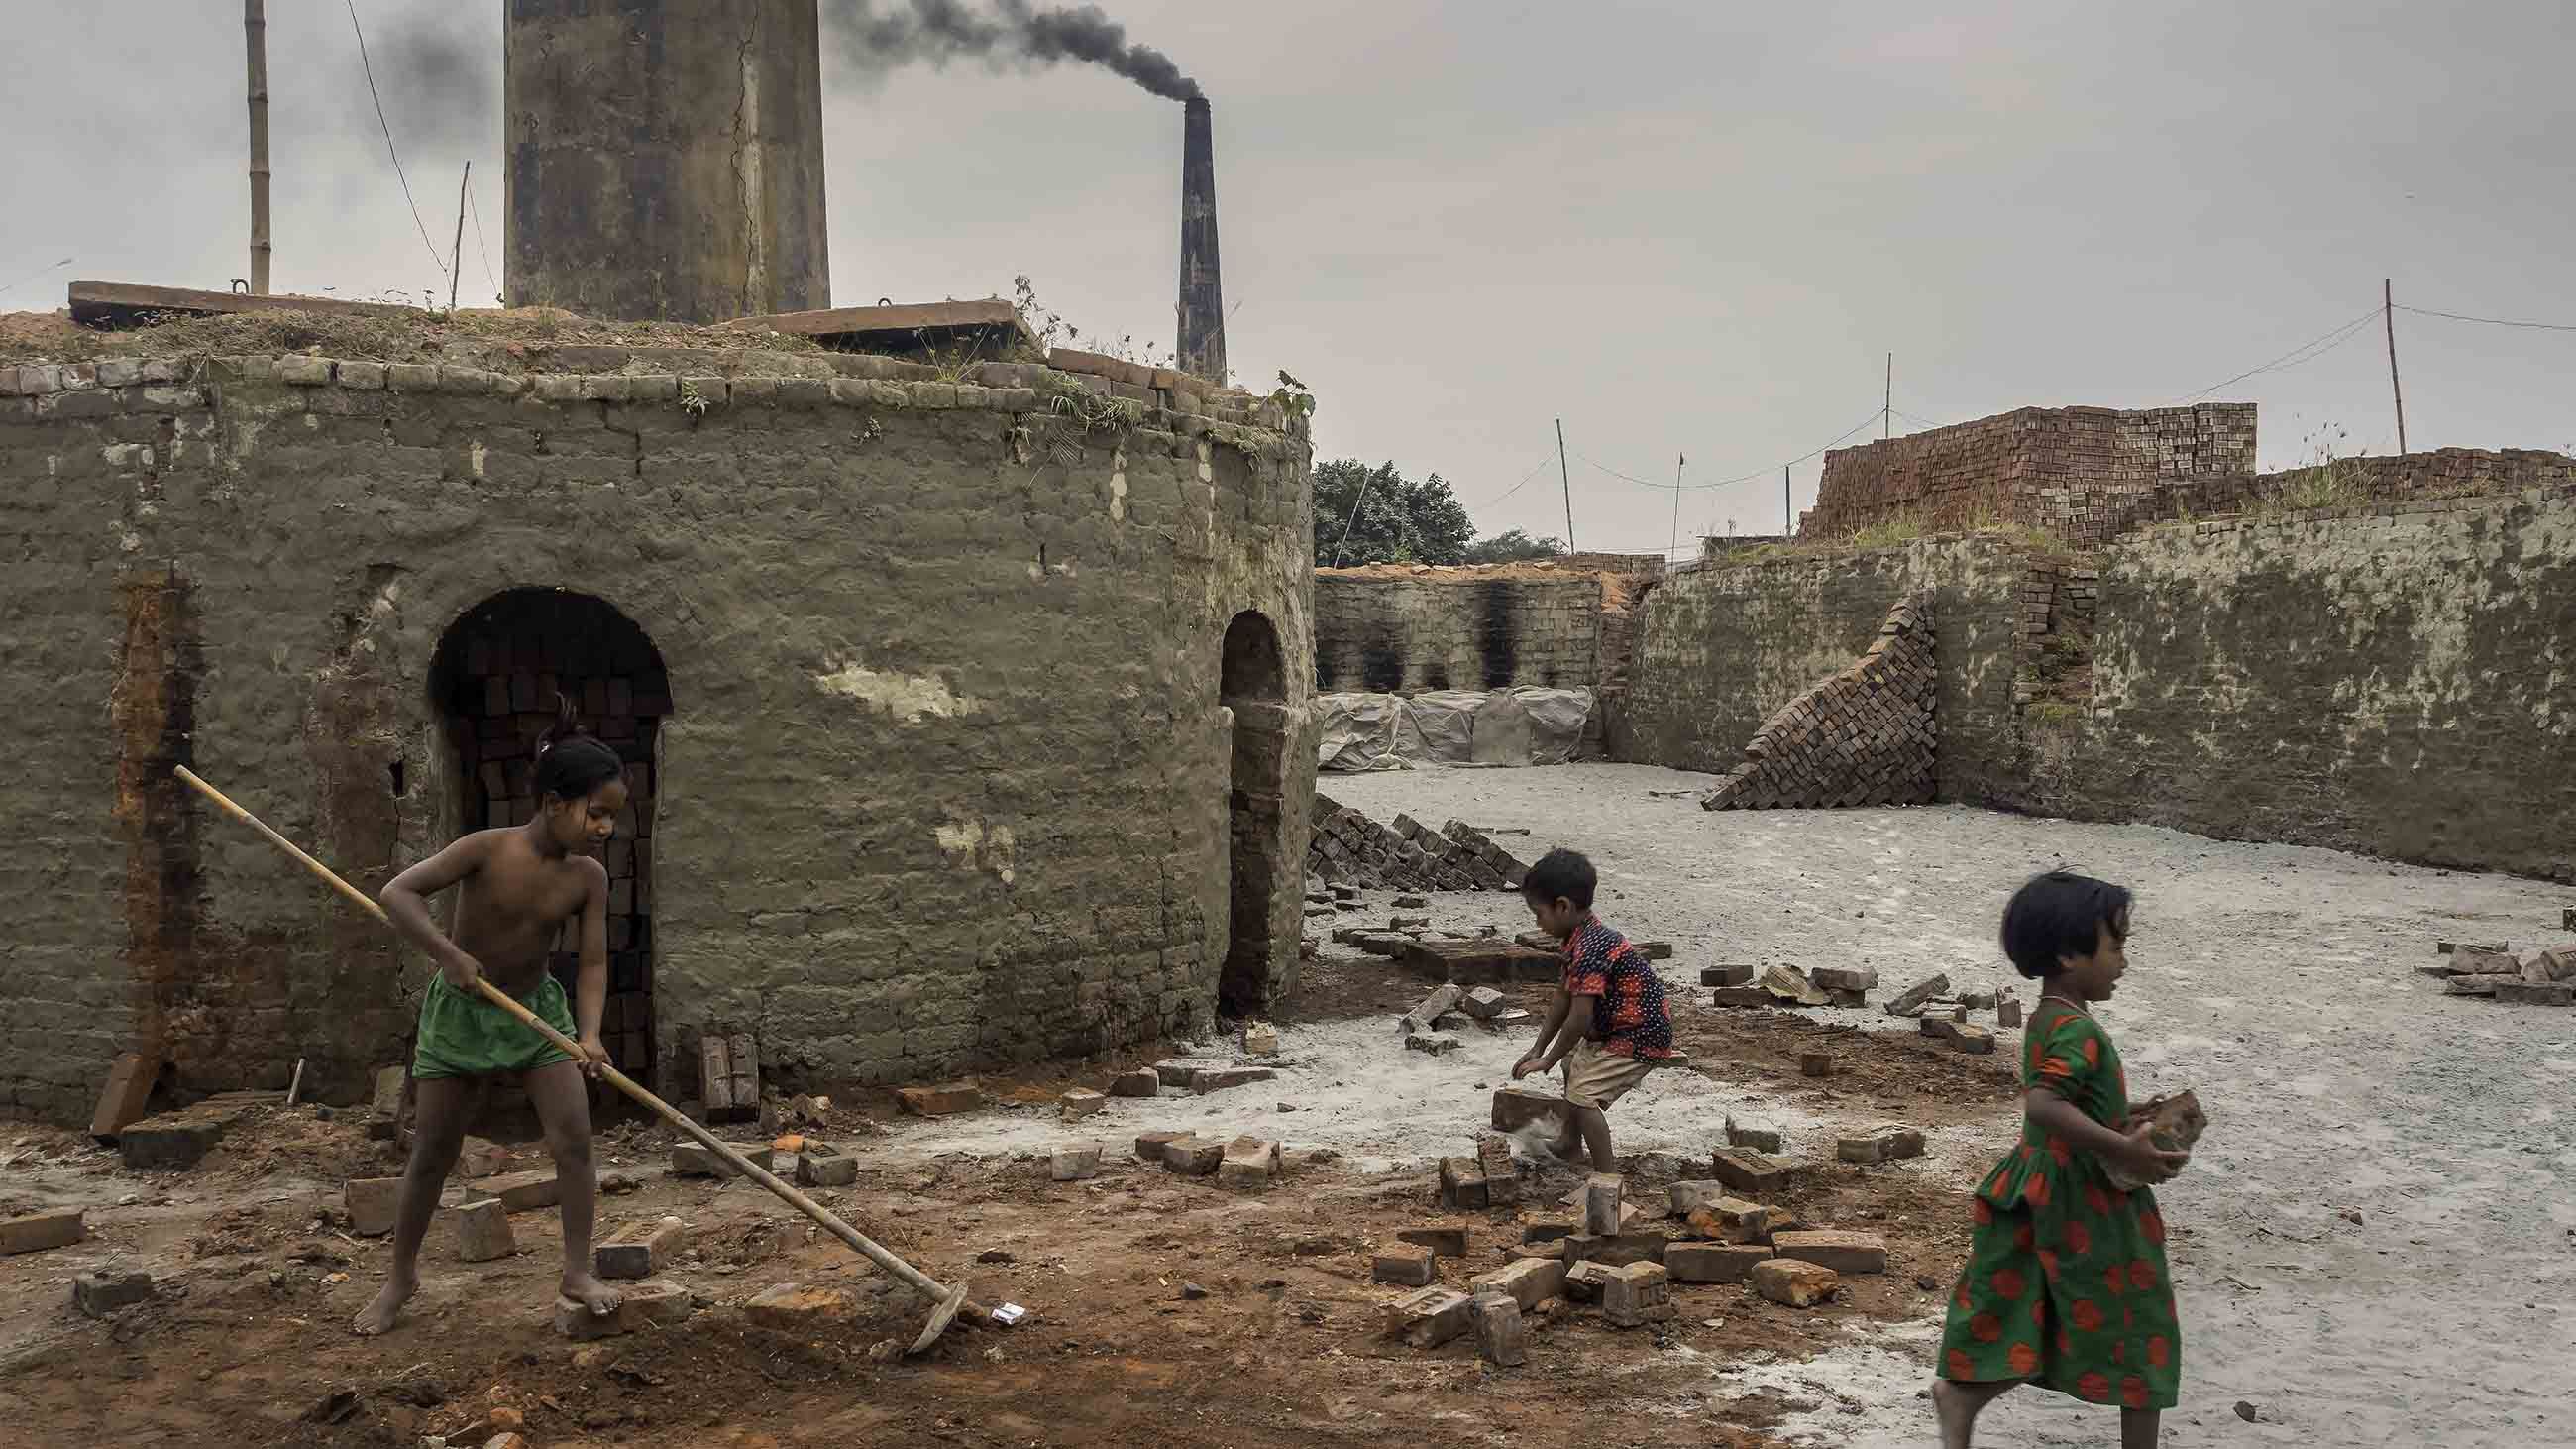 Still, it is the brickmaking industry — particularly in Dhaka — that is the most visible and potent contributor of fine particulate pollution, which is the most deadly. Image by Larry C. Price. Bangladesh, 2018.